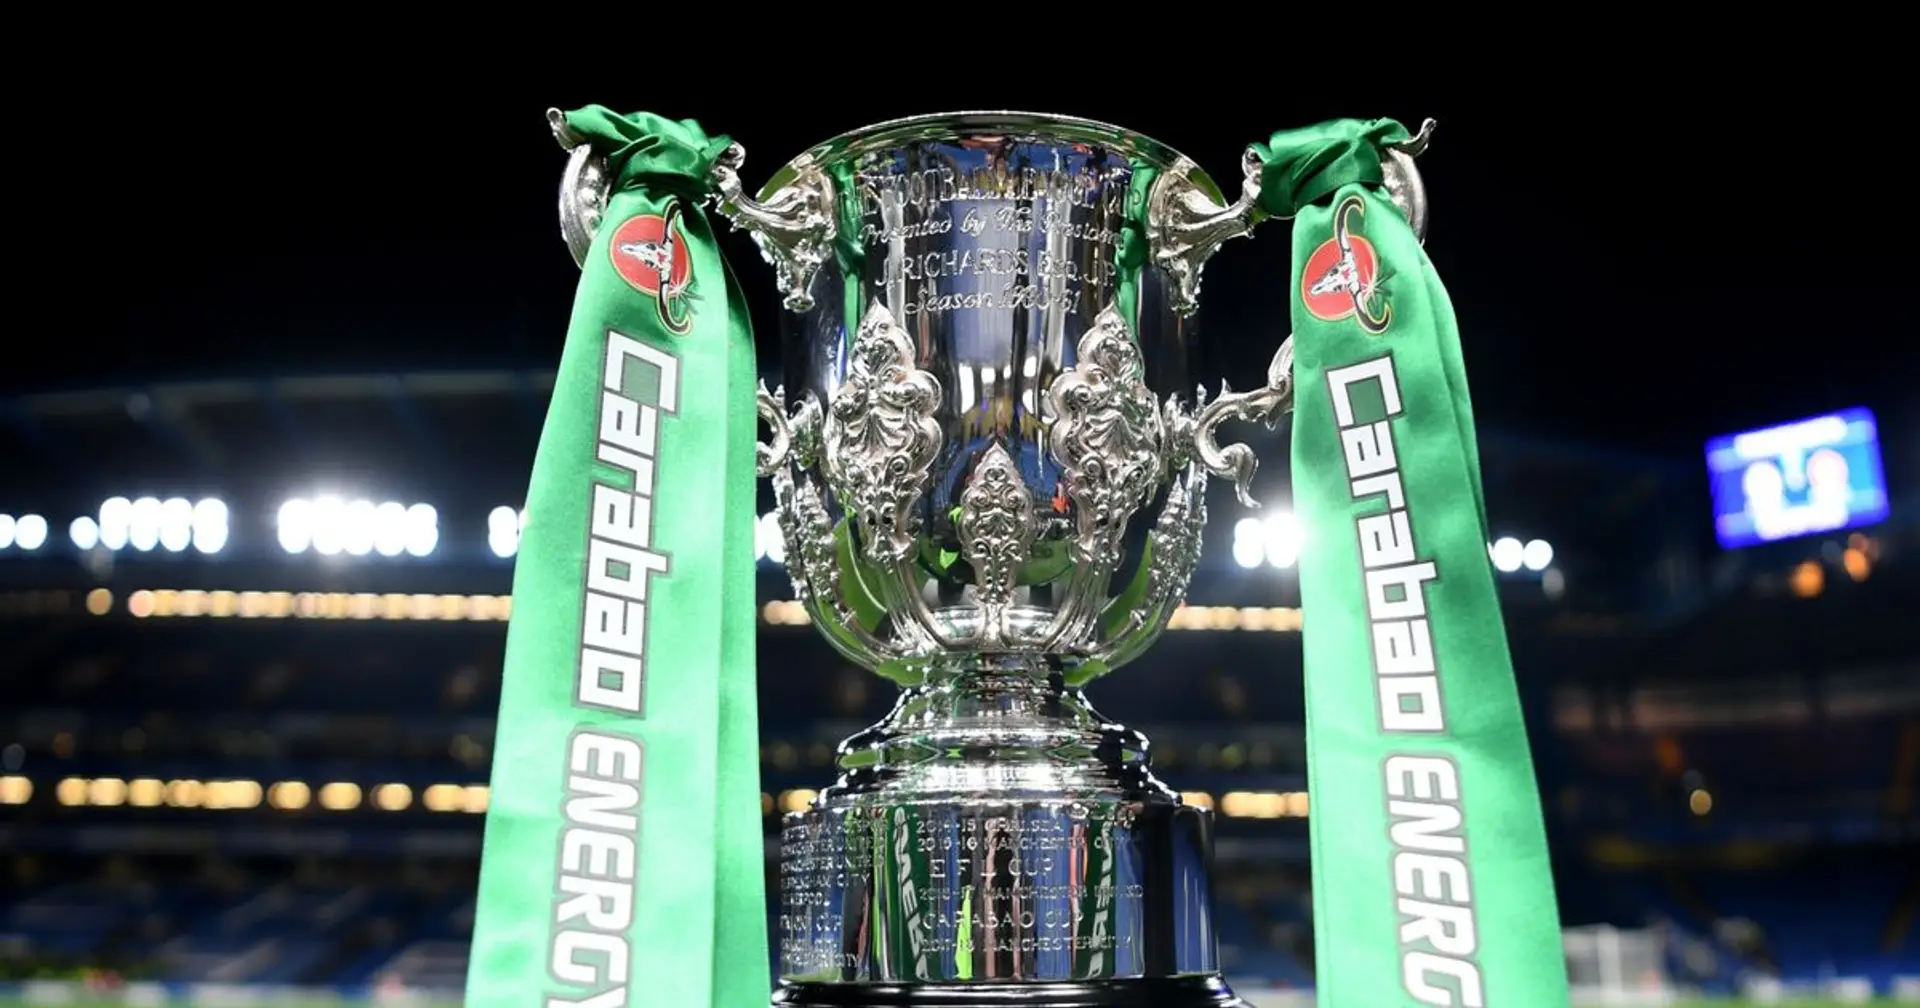 Carabao Cup dates updated as Liverpool look to win first trophy of 2021/22 season